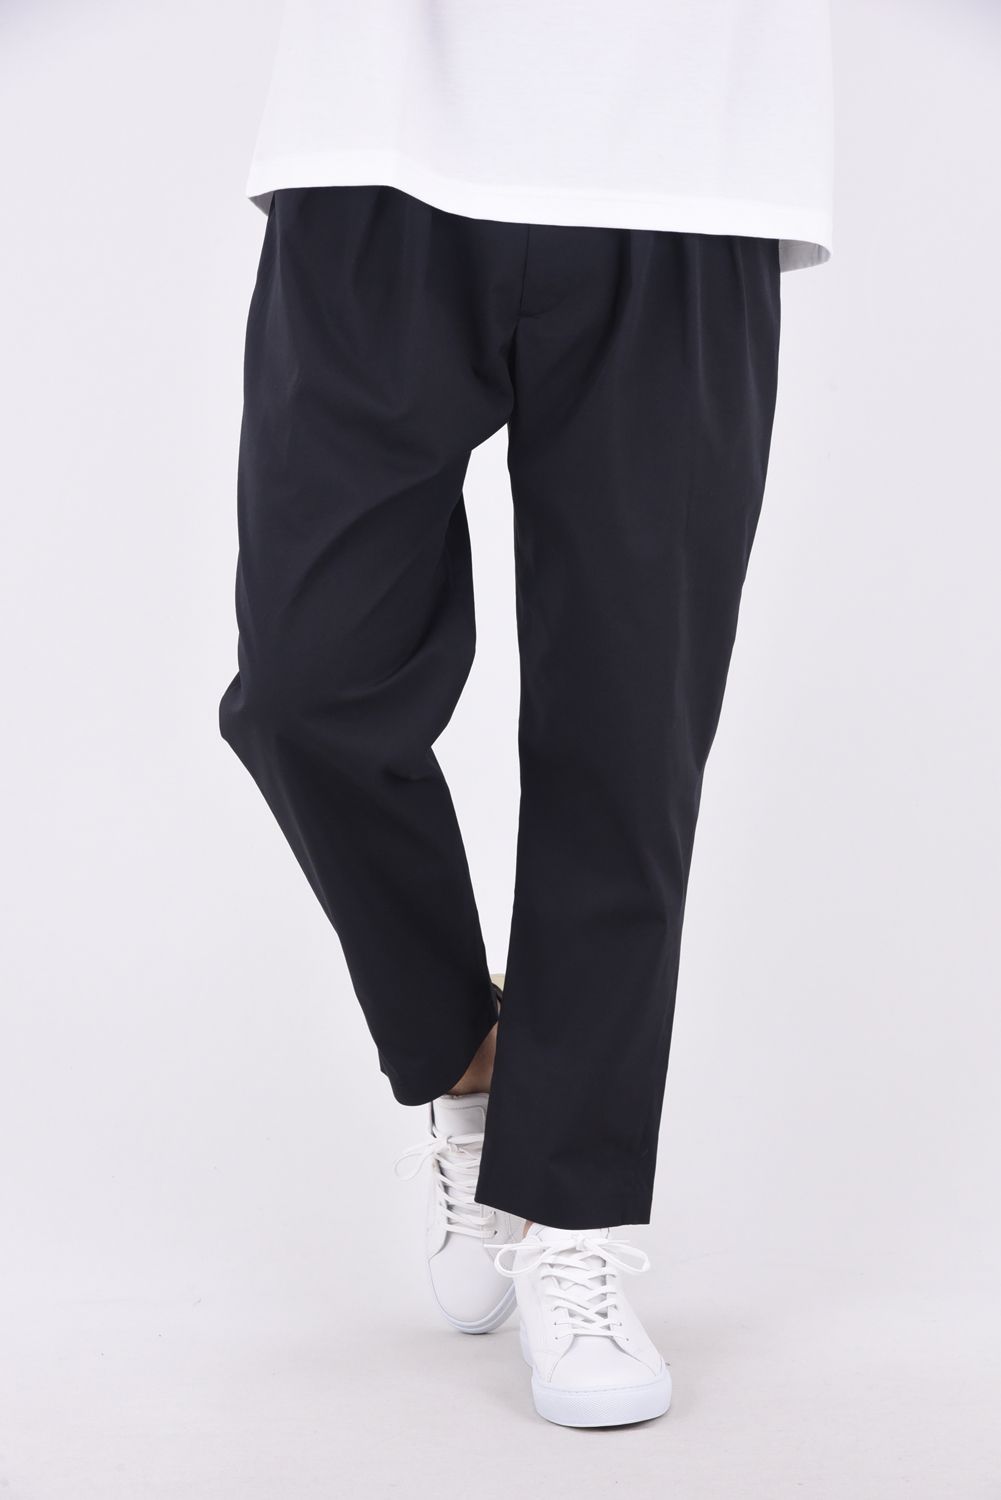 White Mountaineering - 【BLK】 SOLOTEX 3 TUCKED EASY TAPERED PANTS